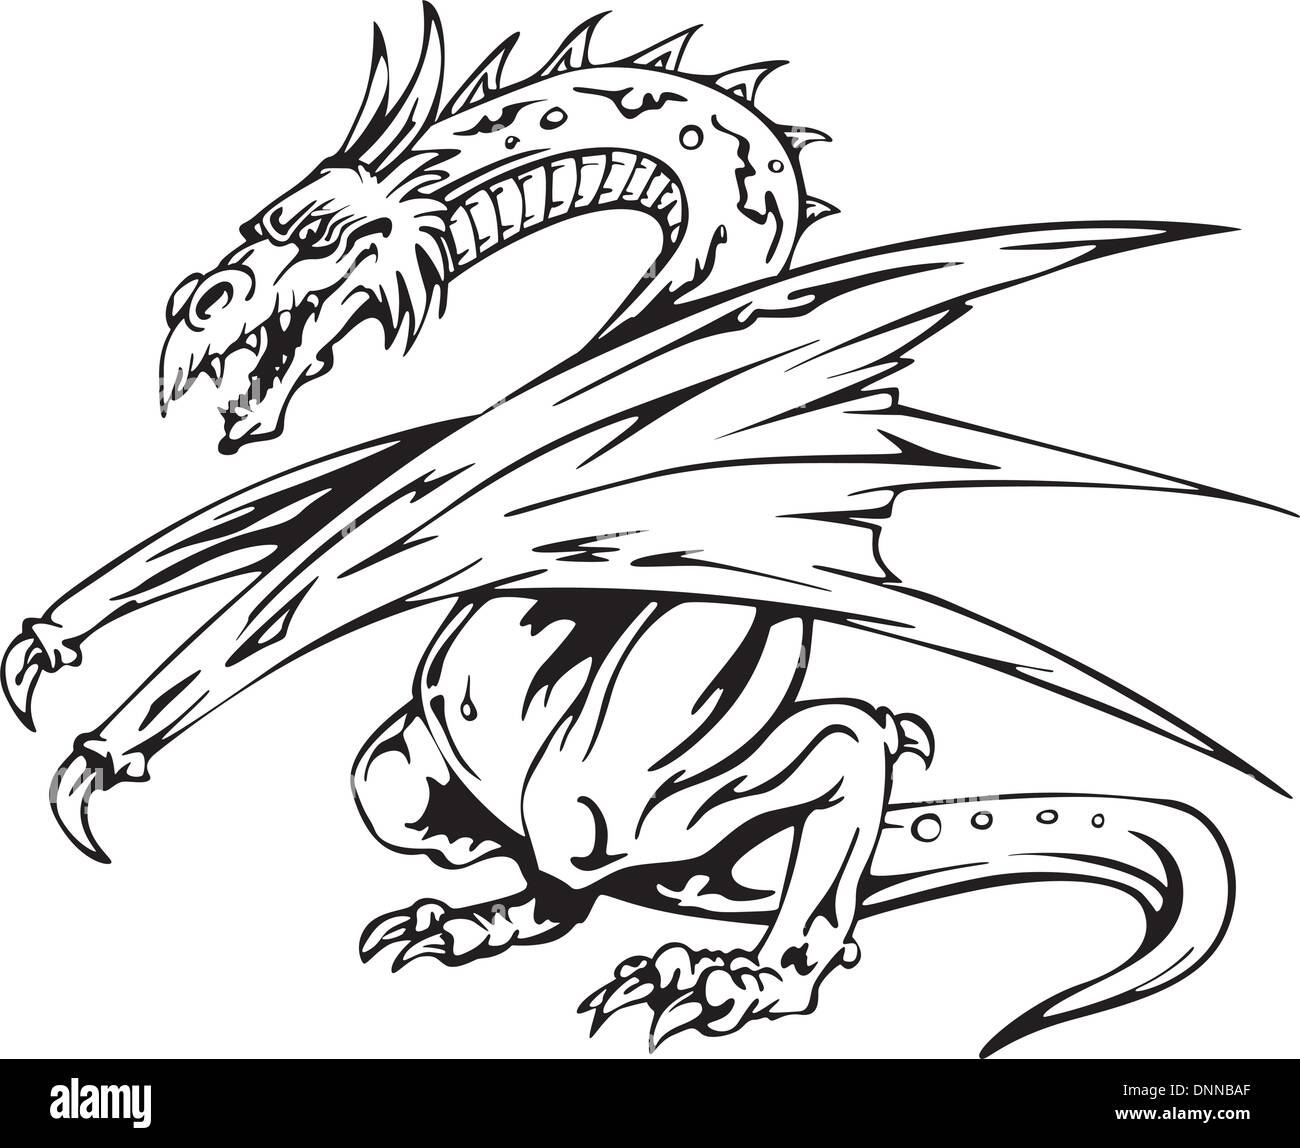 Dragon tattoo. Back and white vector illustrations. Stock Vector